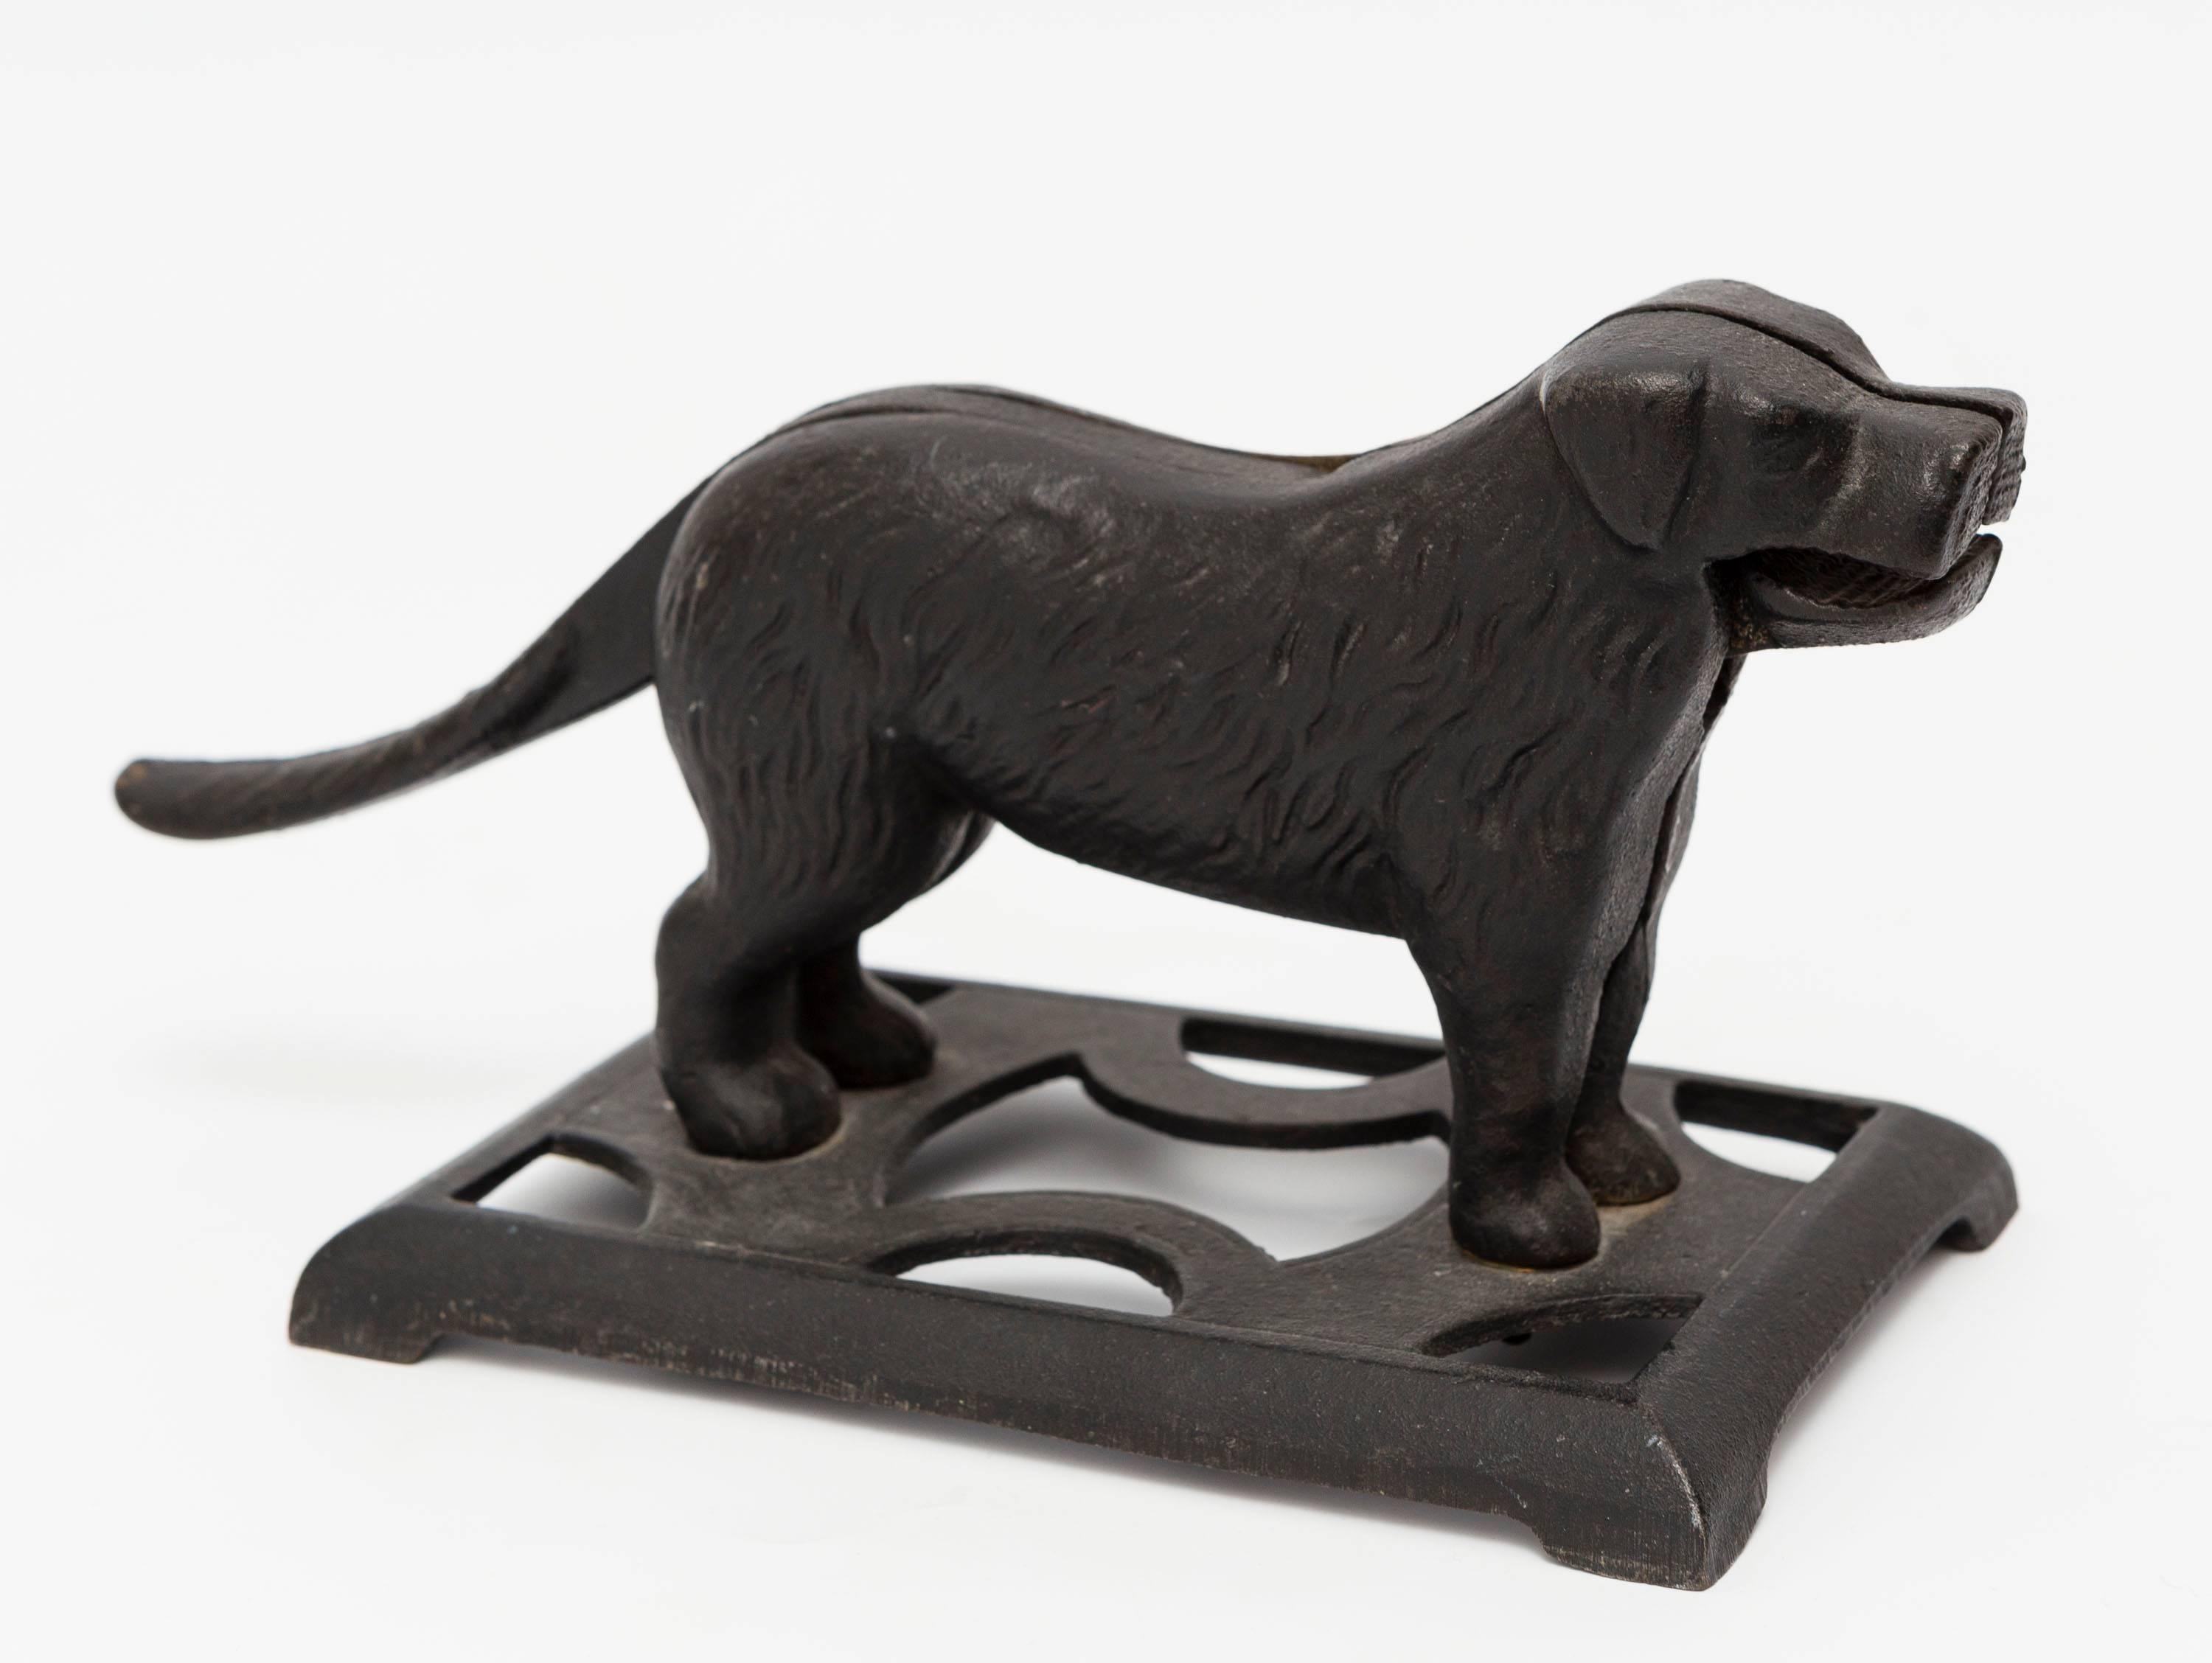 Vintage cast iron dog nutcracker. Great as a Christmas gift with a bowl of walnuts.